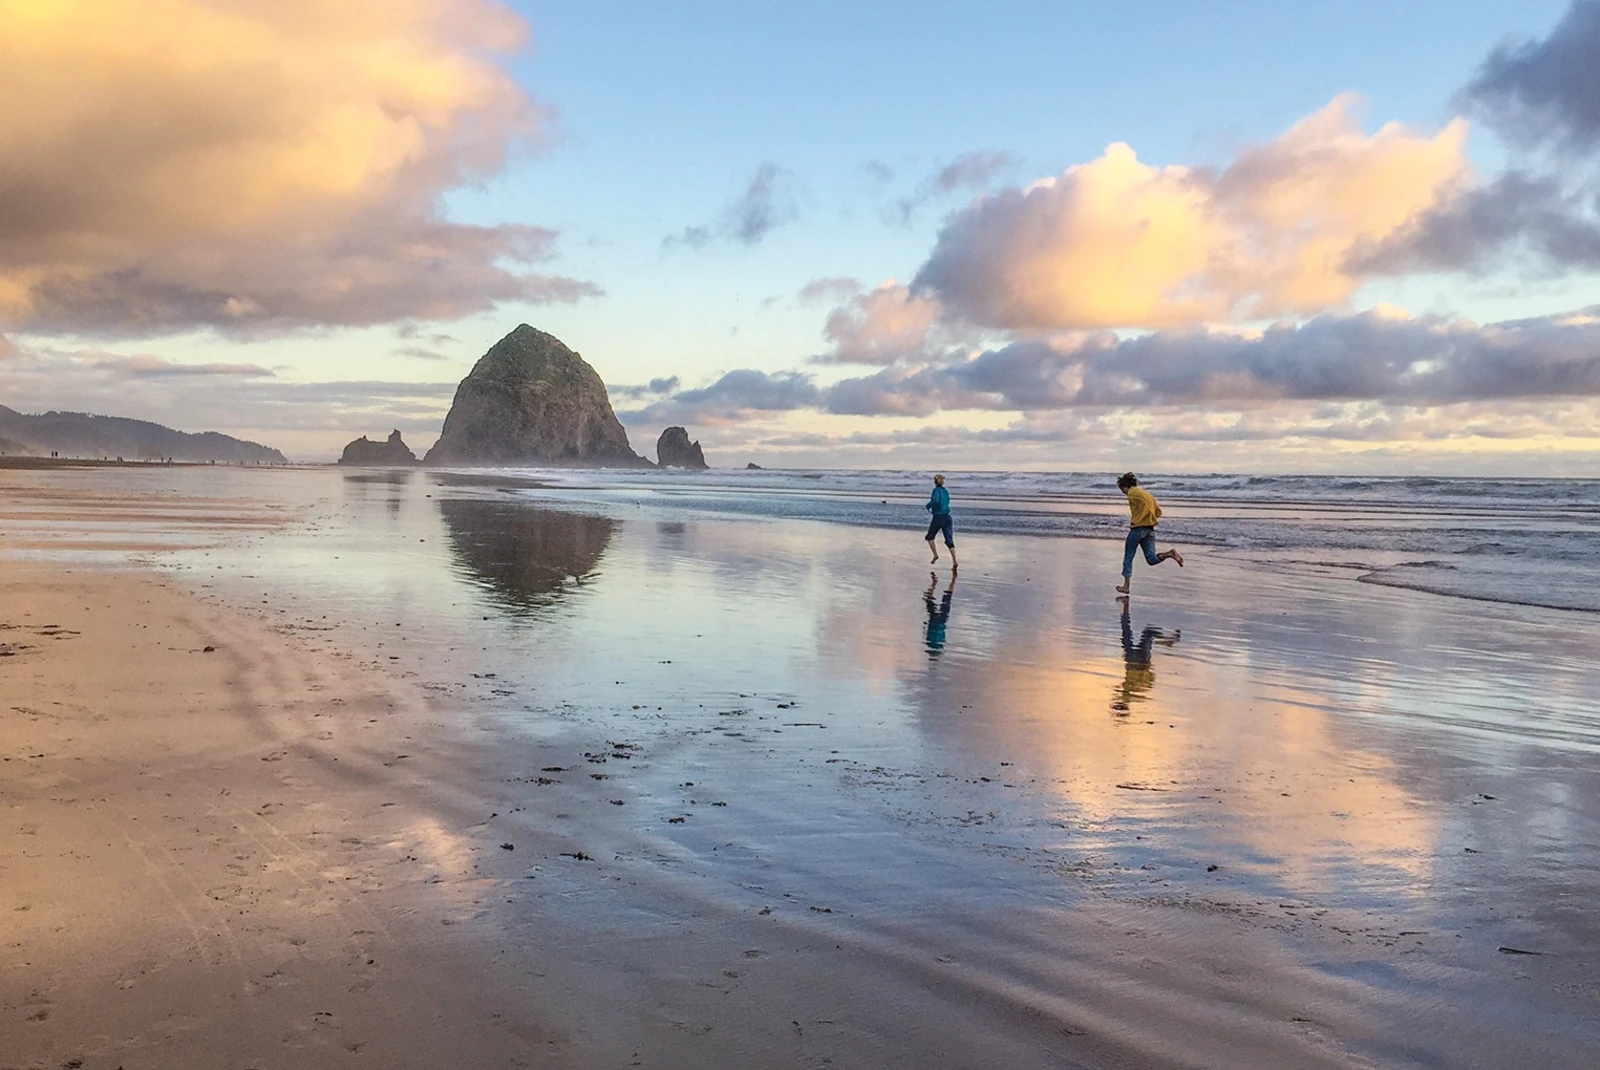 7-Day Road Trip of Oregon - Day 6: Cannon Beach and seaside